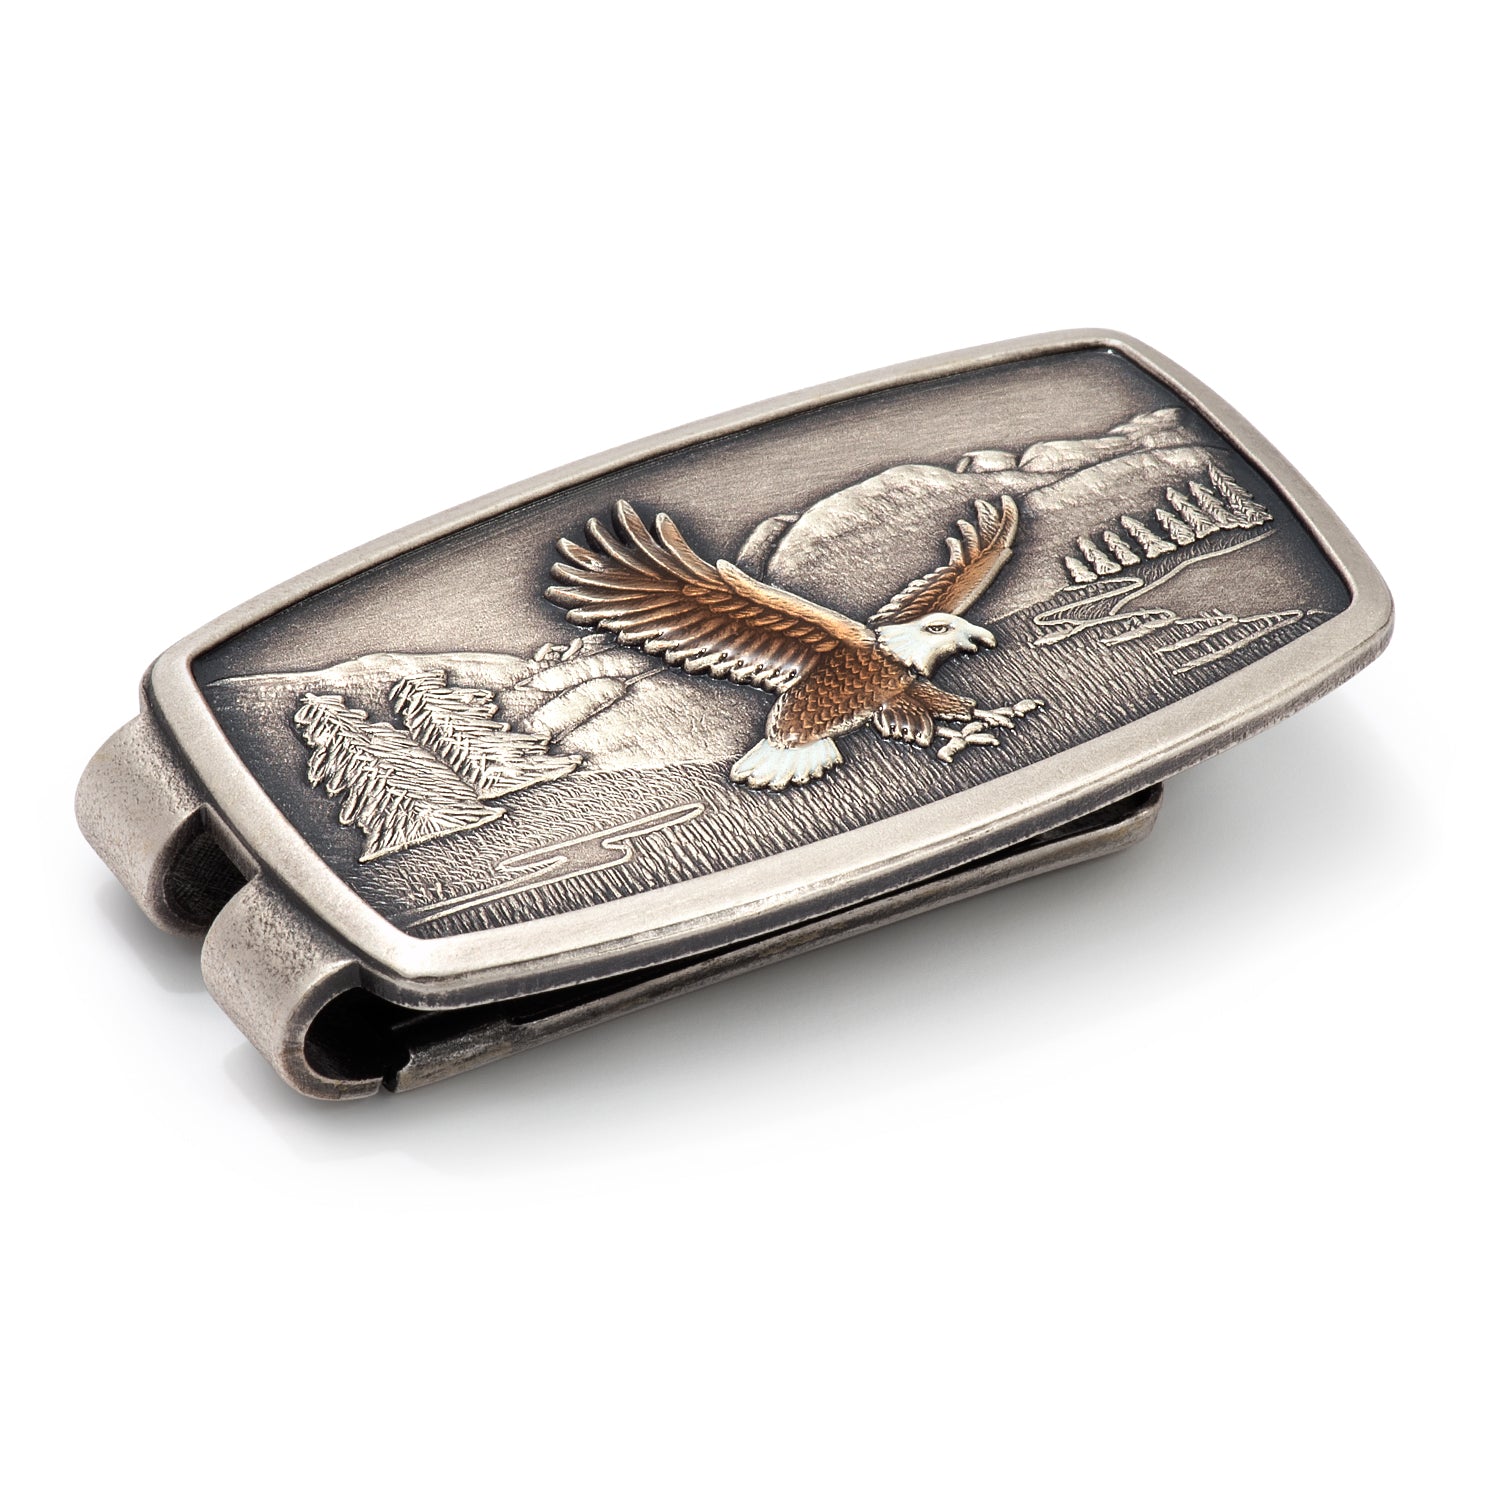 Patriotic Brass Enamel Eagle Money Clip - Made in the USA